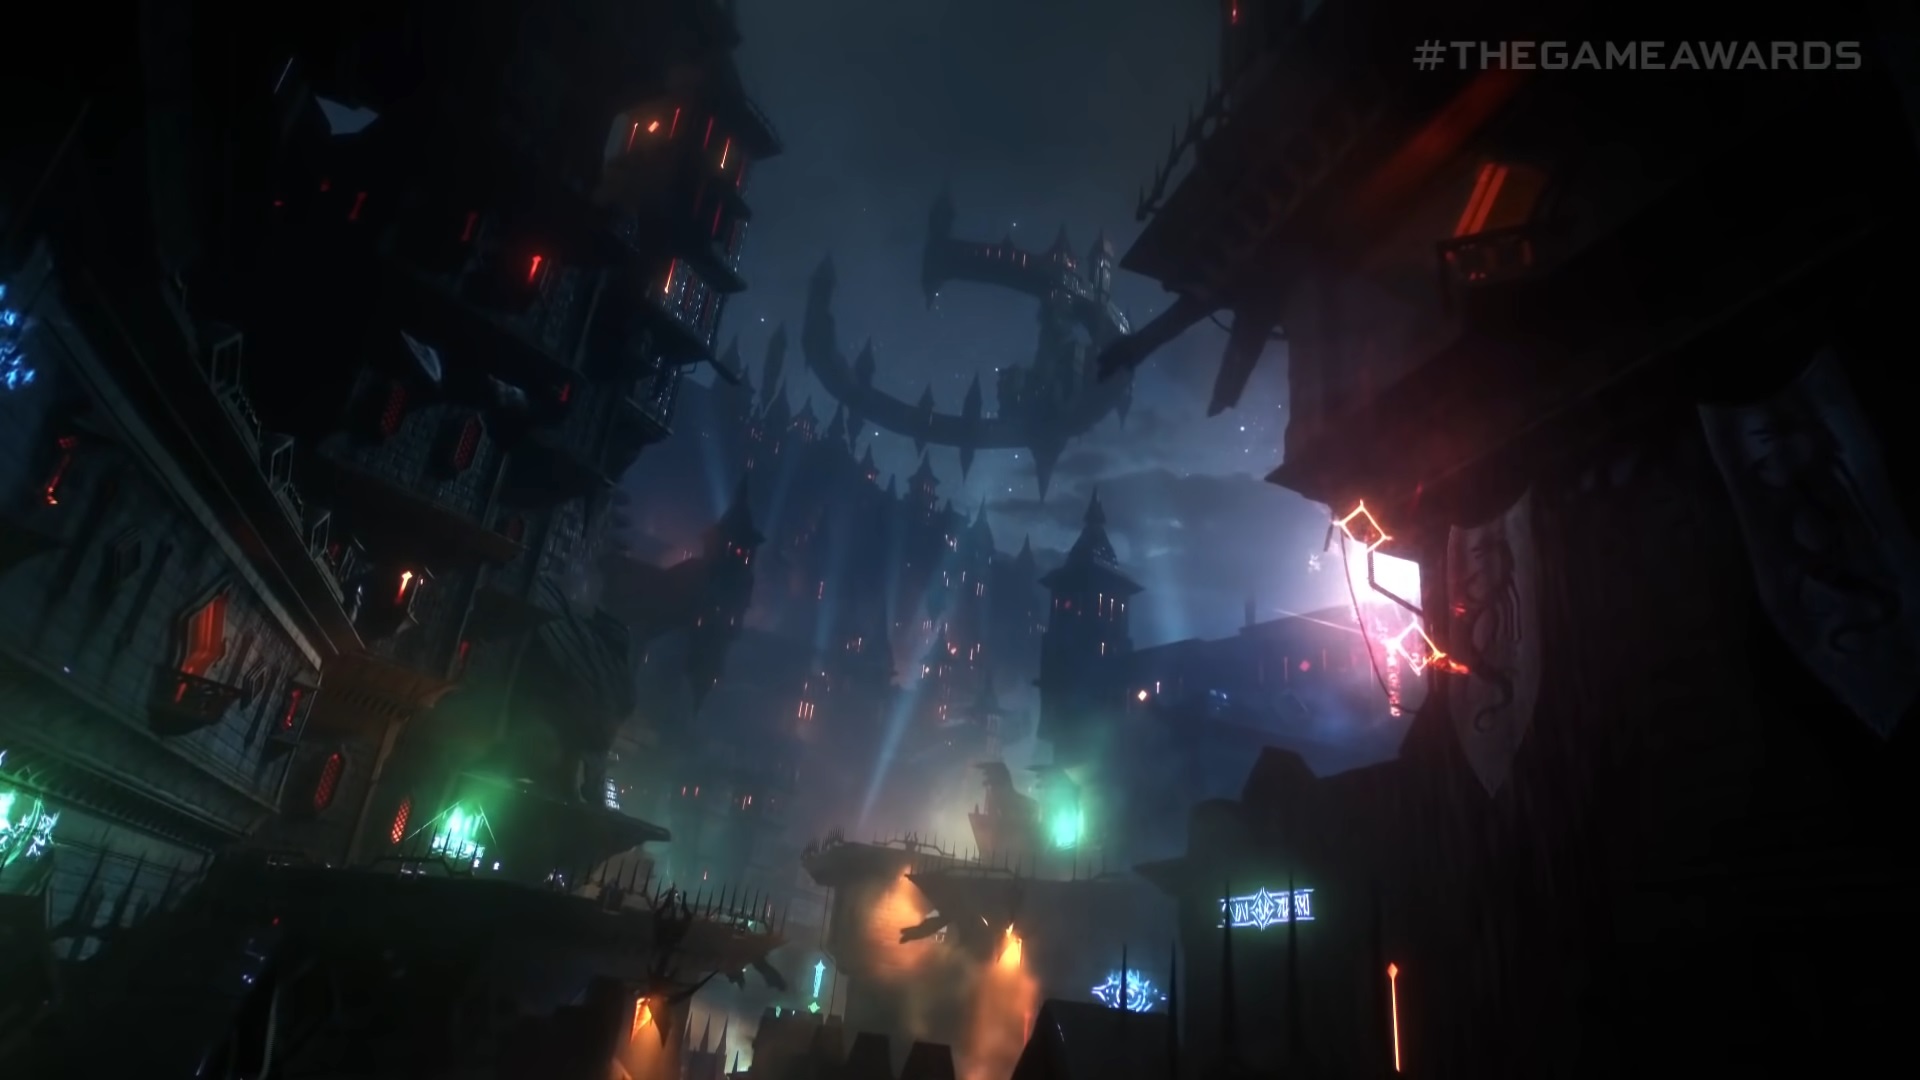 A glowing medievil city.